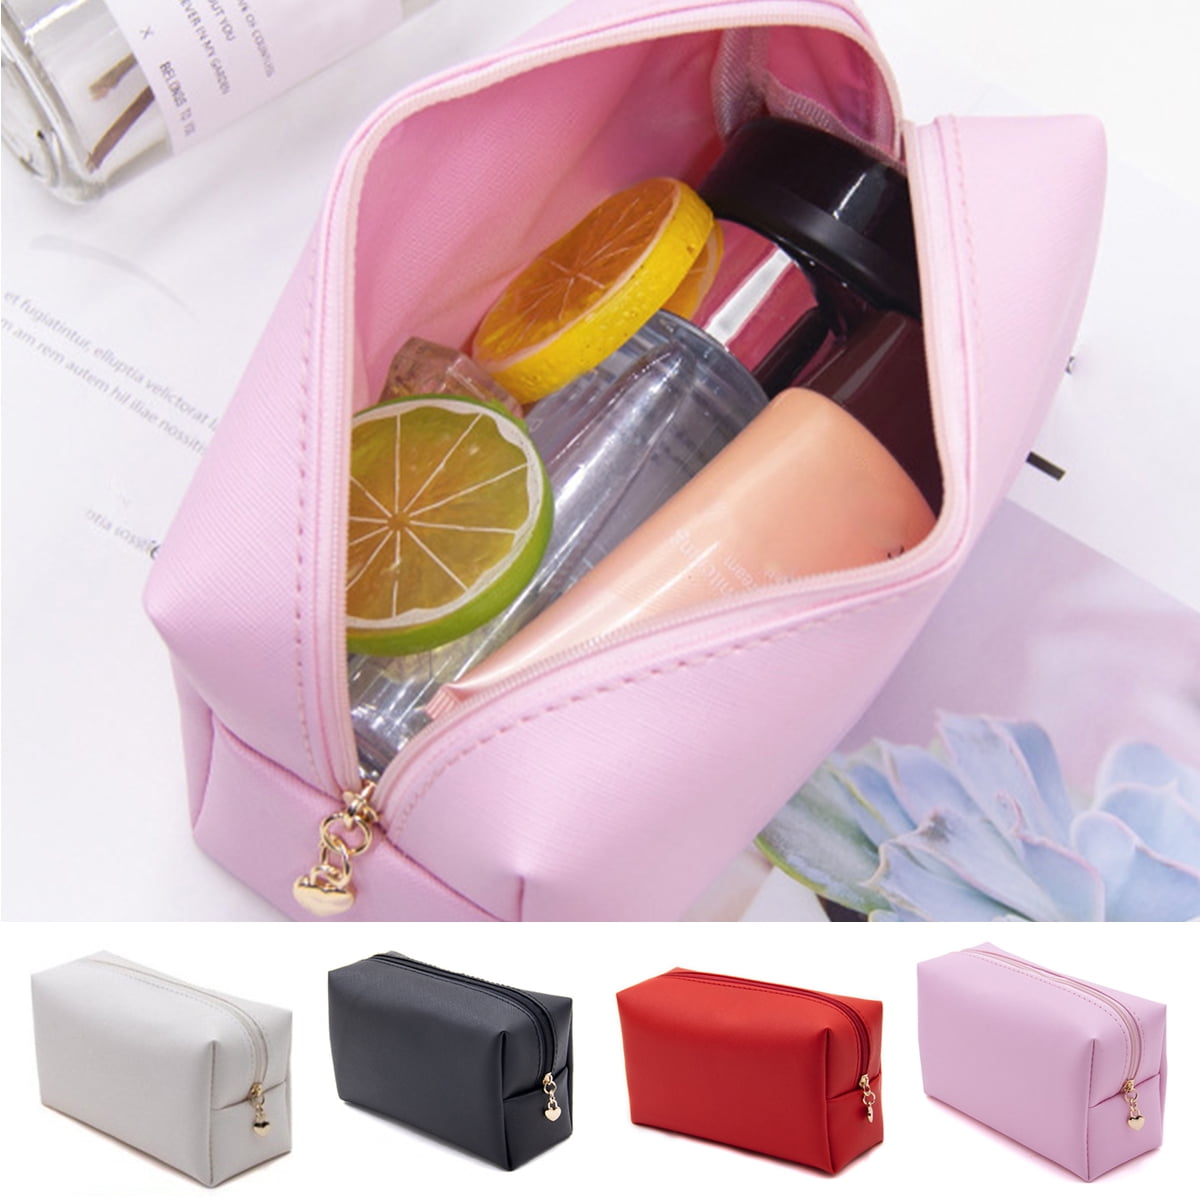 Travel Makeup Bag for Women Pink Checkered Cosmetic Pouch Vegan